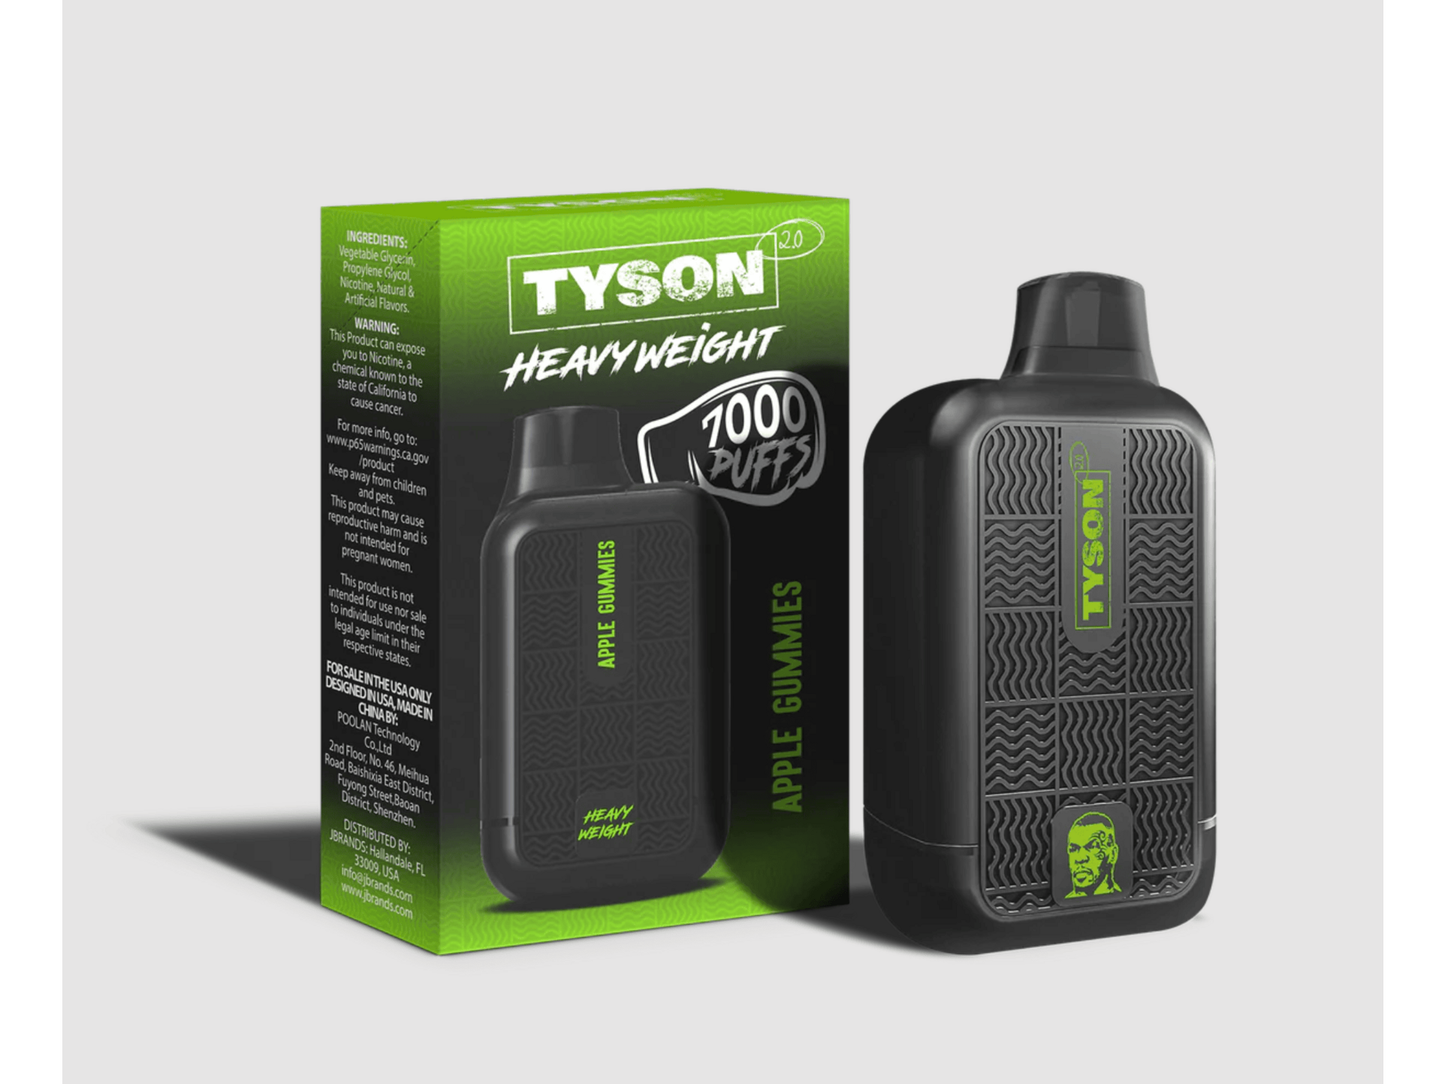 Tyson Heavyweight Apple Gummies flavored disposable vape device and box.